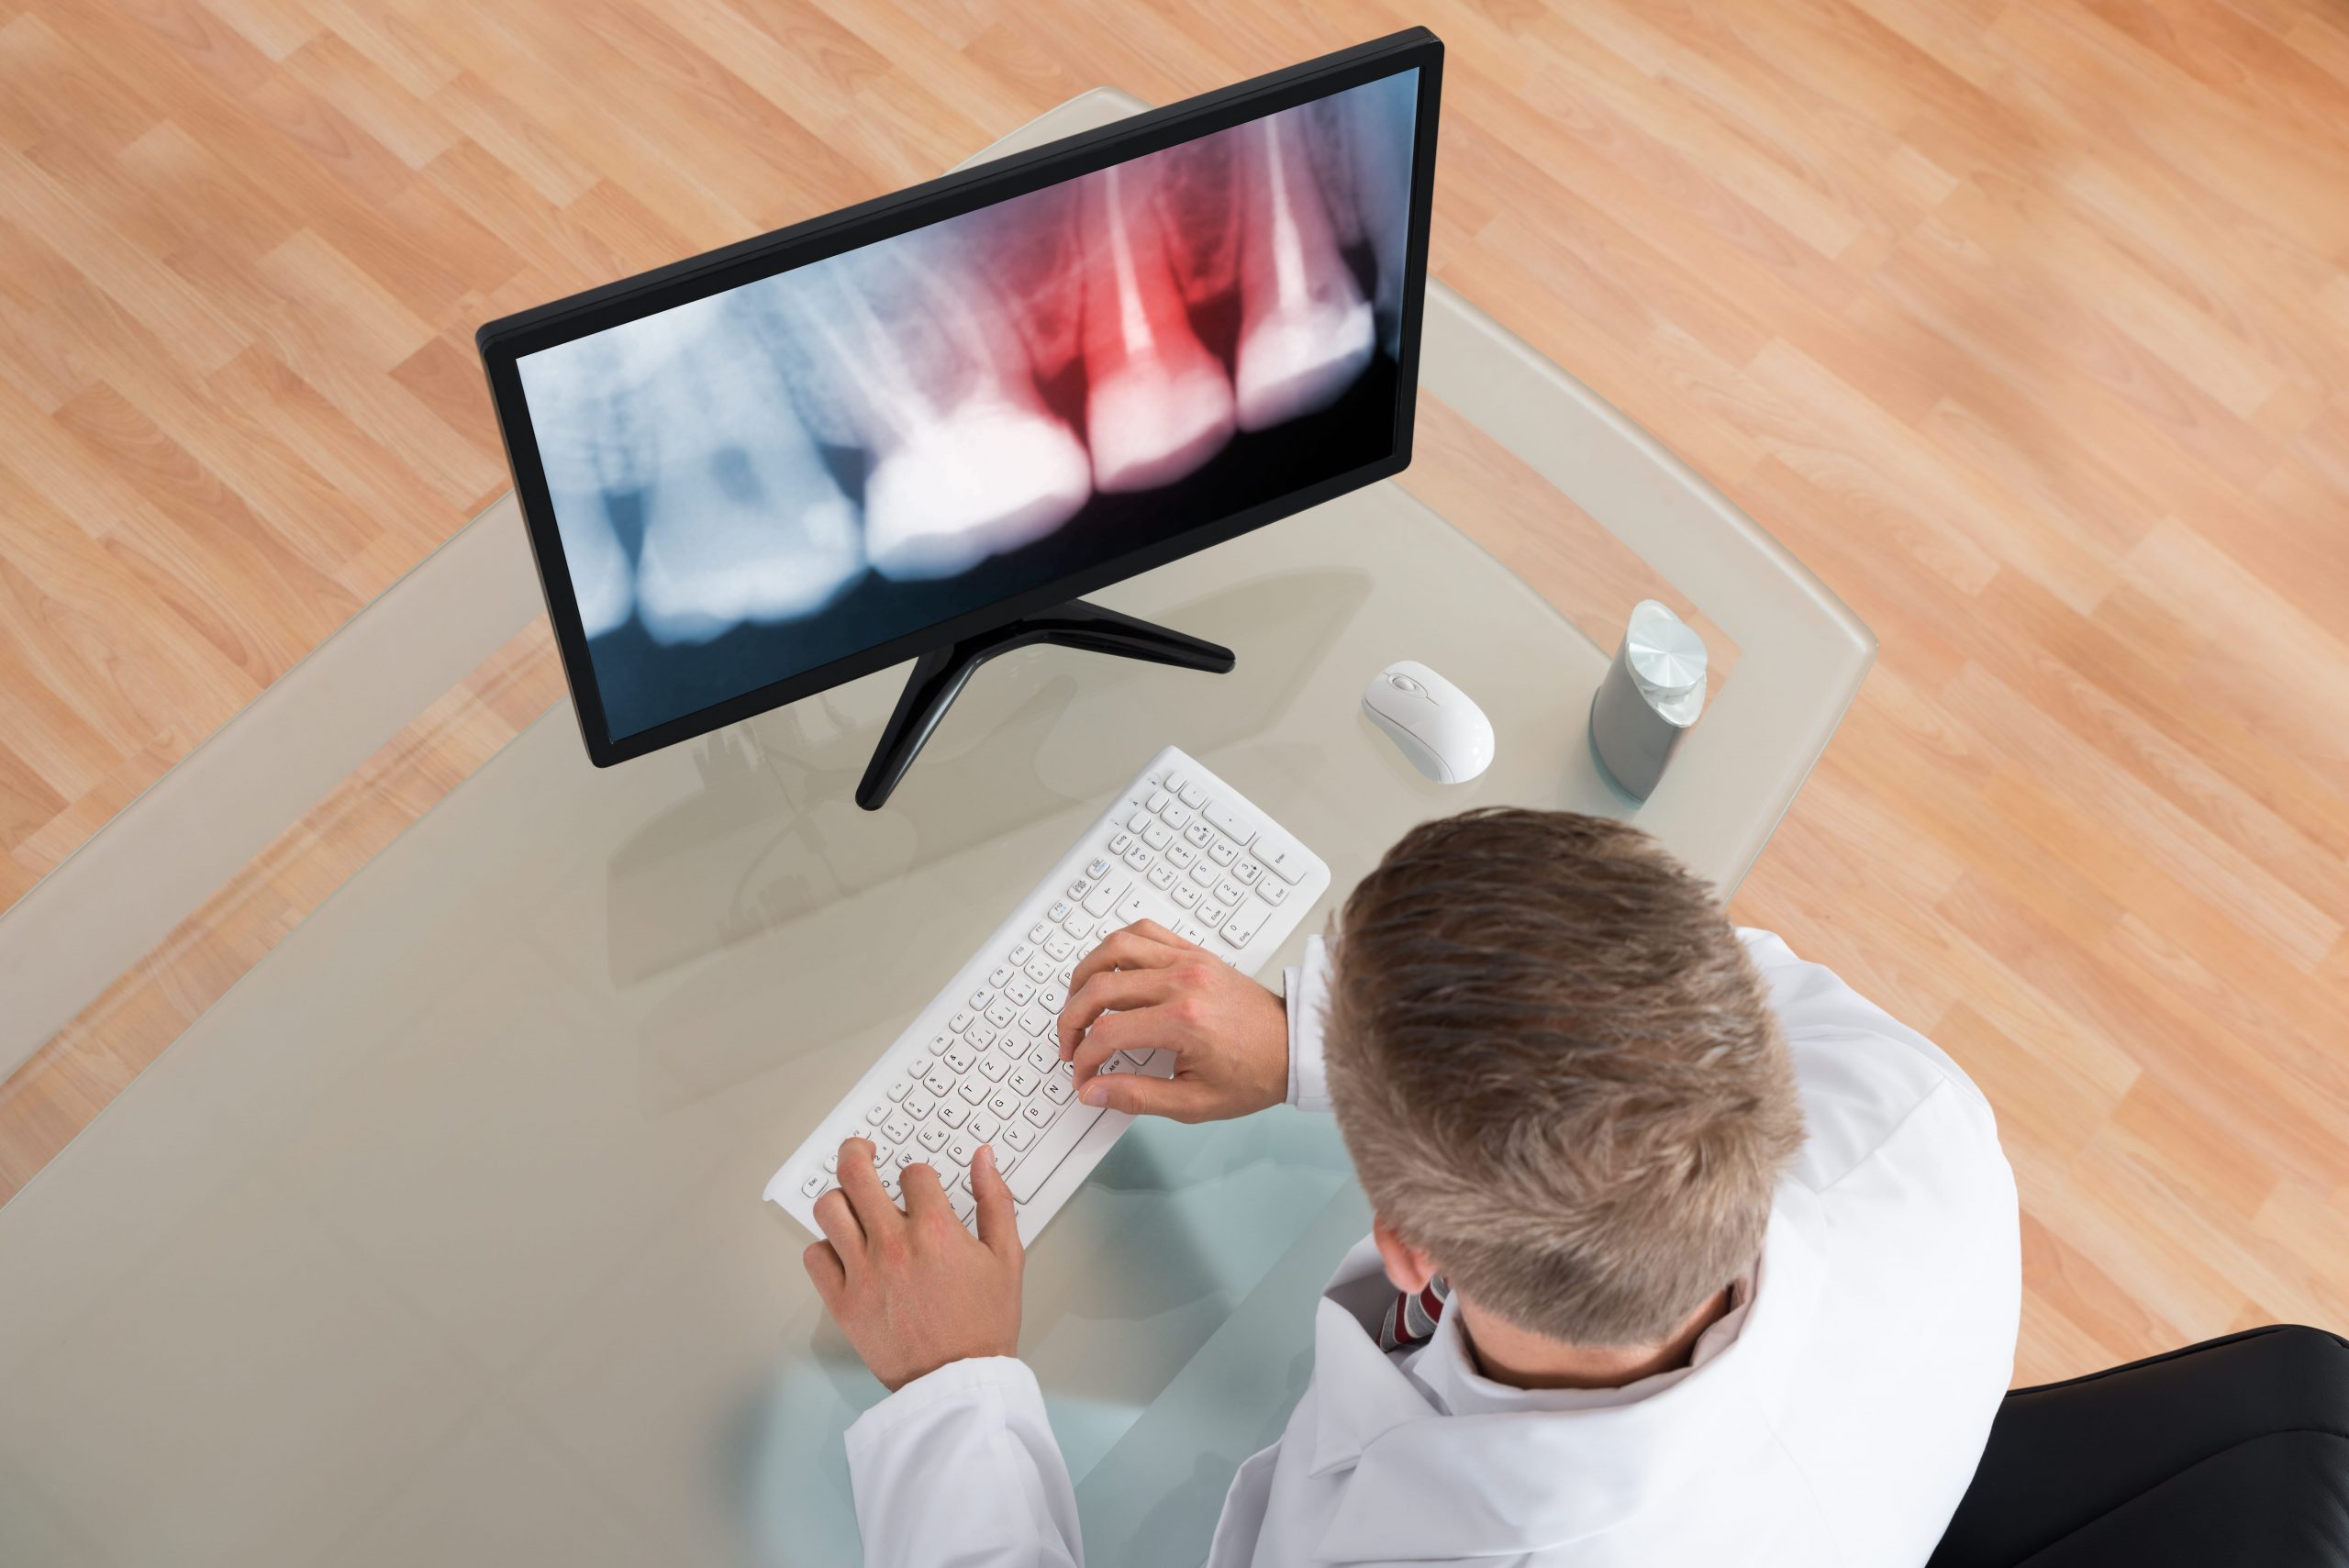 Dentist looking at x-ray on computer.